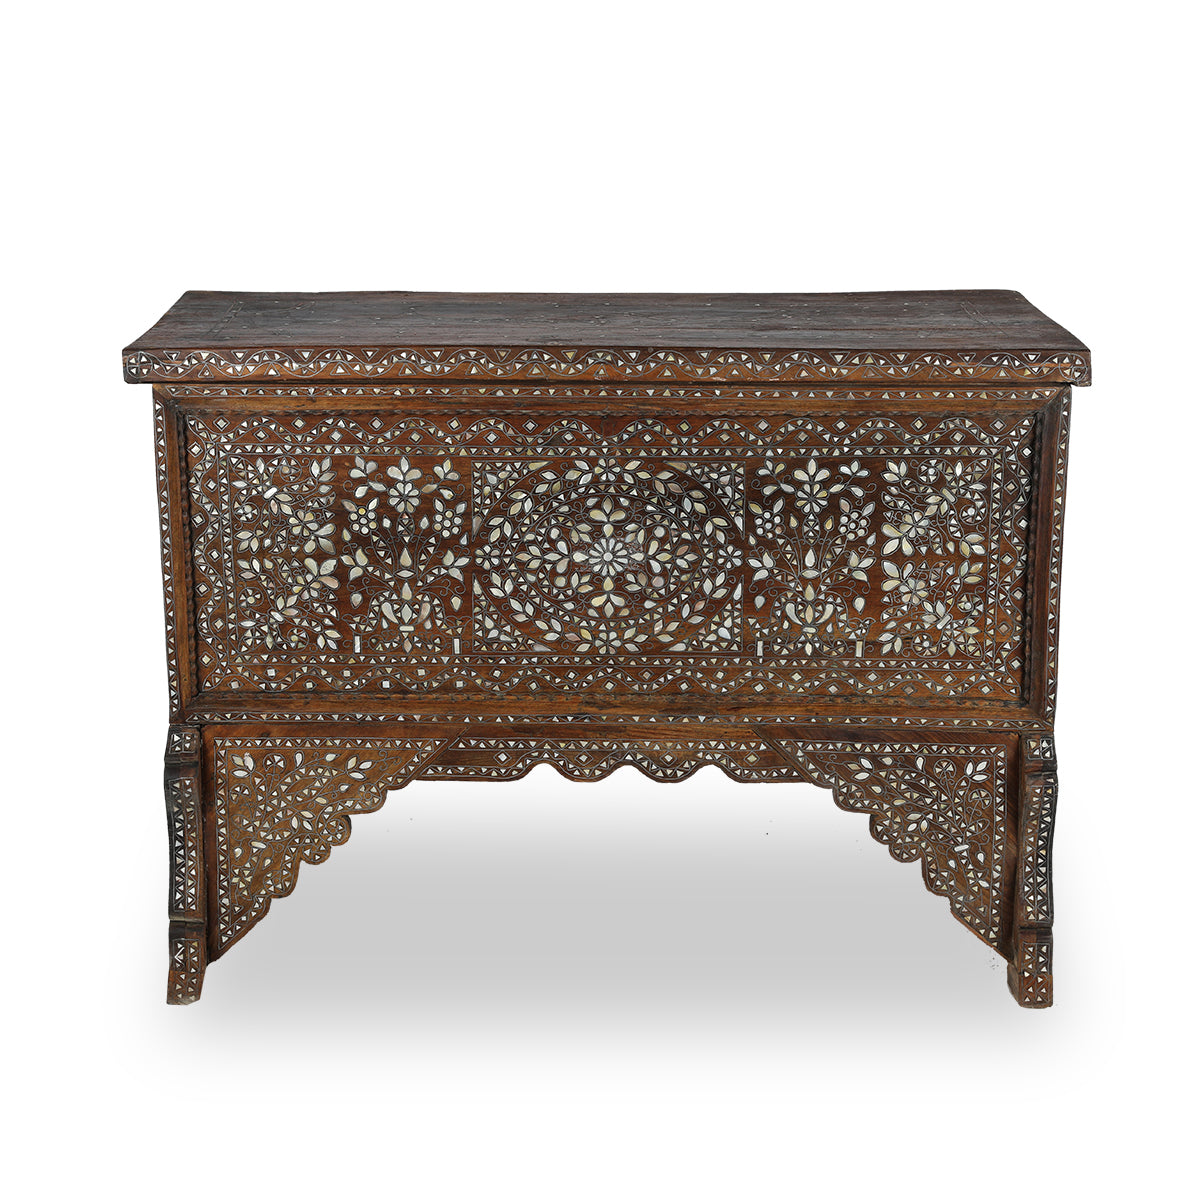 Front View of Mother of Pearl Inlaid Floral Design Console